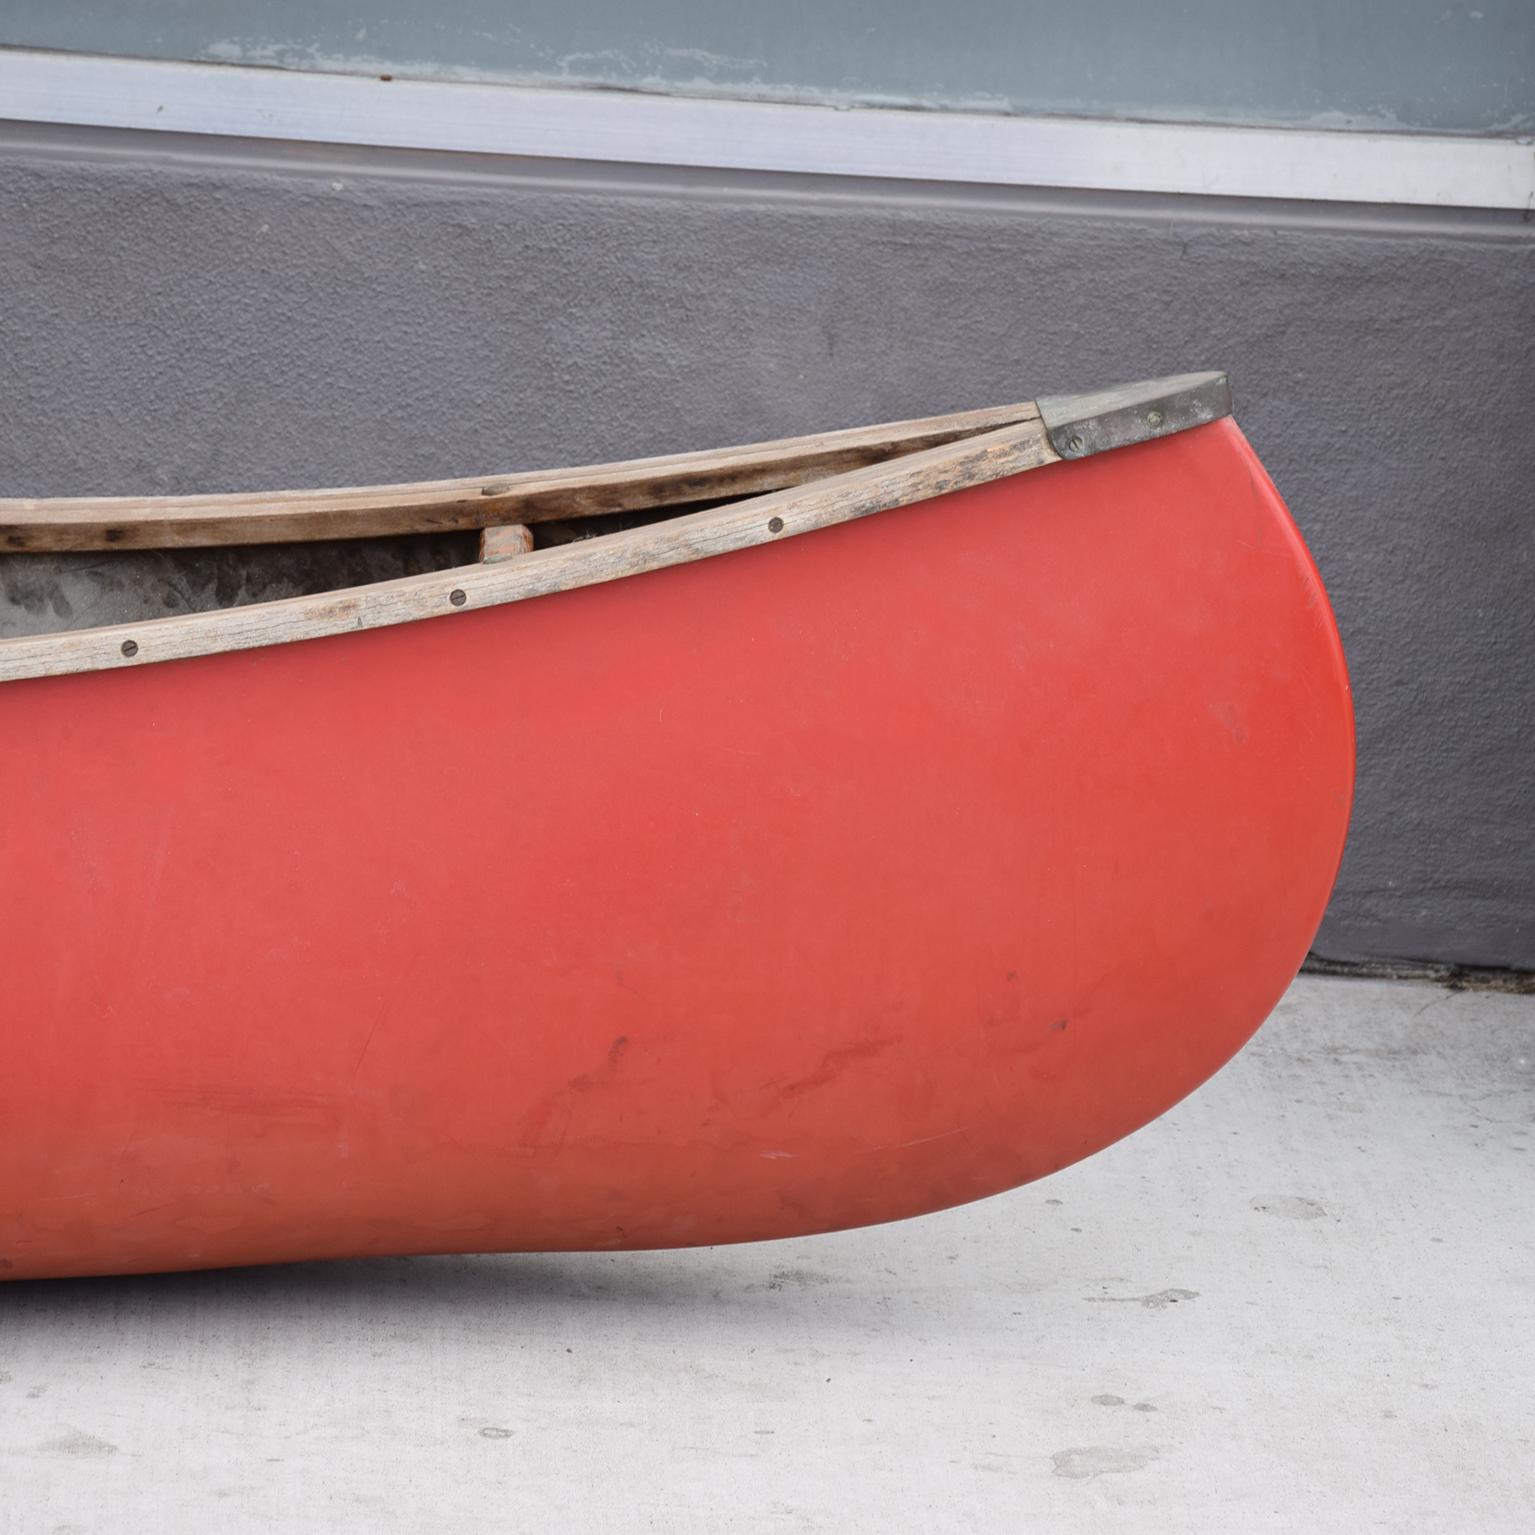 For your consideration a vintage Old Town Canoe in red color with wood and brass accents. 
Shows signs of vintage wear.
Dimensions: 191